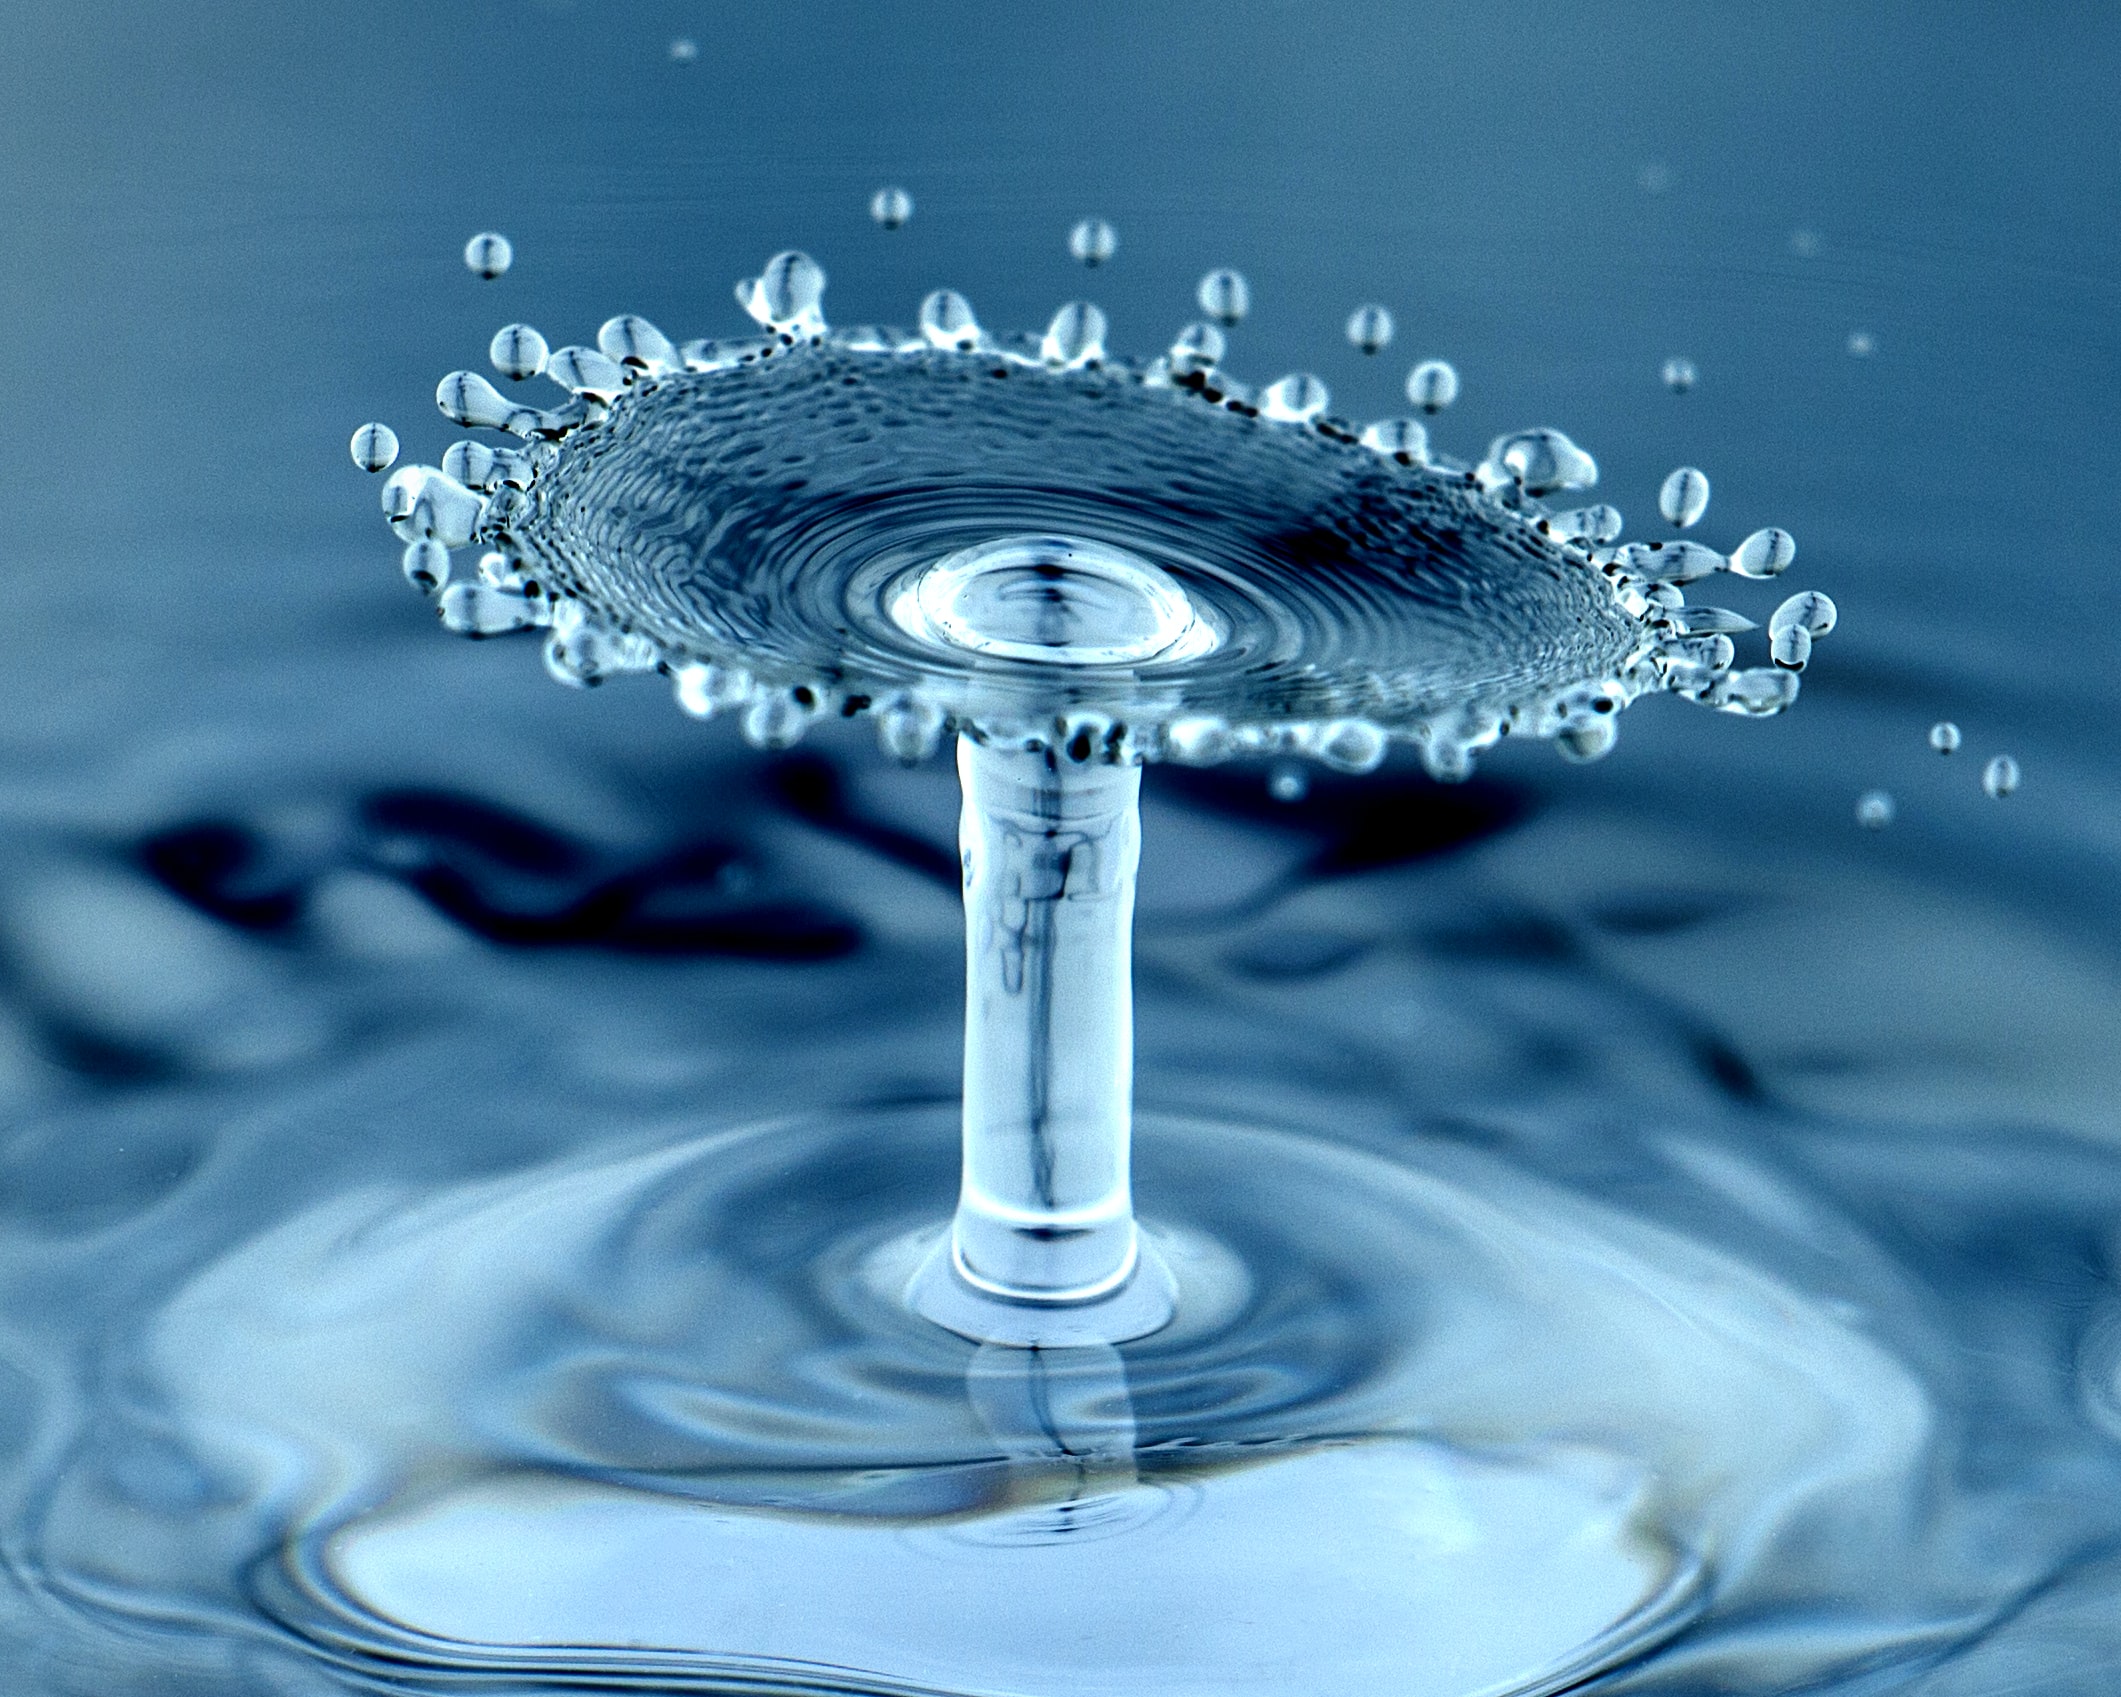 A close up of a water droplet splashing